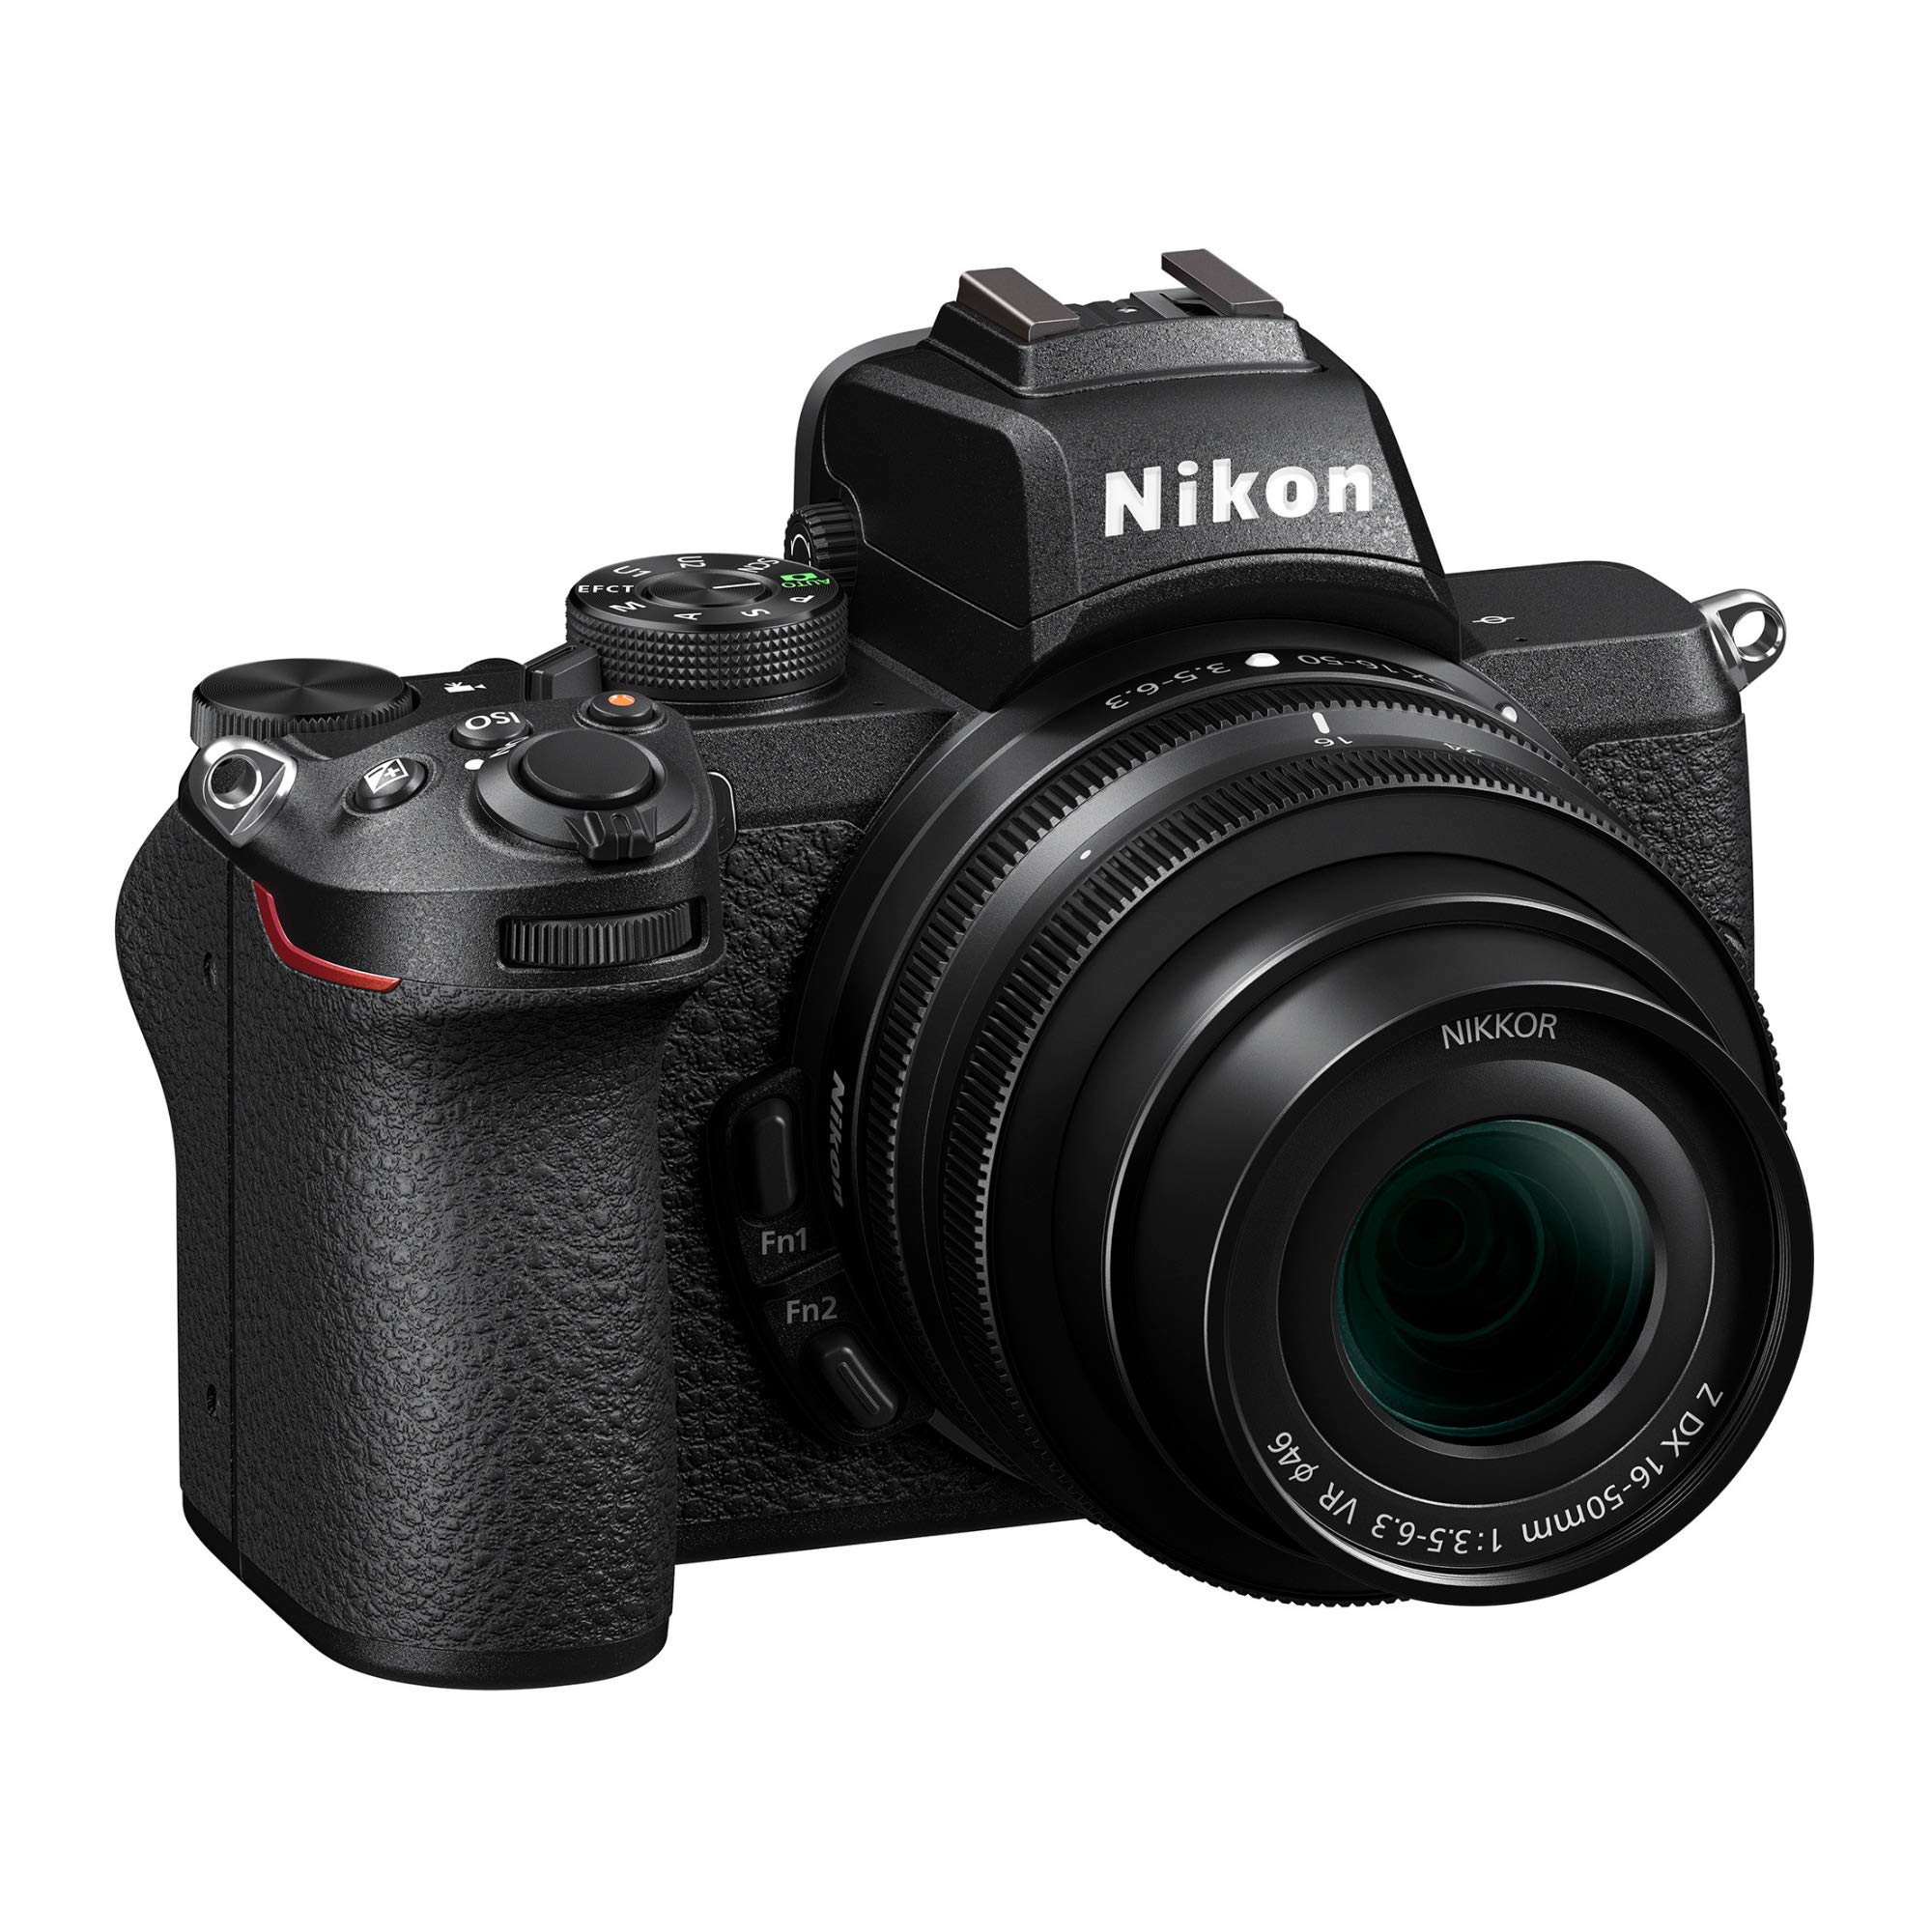 Nikon Z 50 DX-Format Mirrorless Camera with NIKKOR Z DX 16-50mm f/3.5-6.3 VR Lens Bundle with Mount Adapter and 64GB Extreme PRO 200MB/s SDXC UHS-I Memory Card (3 Items)